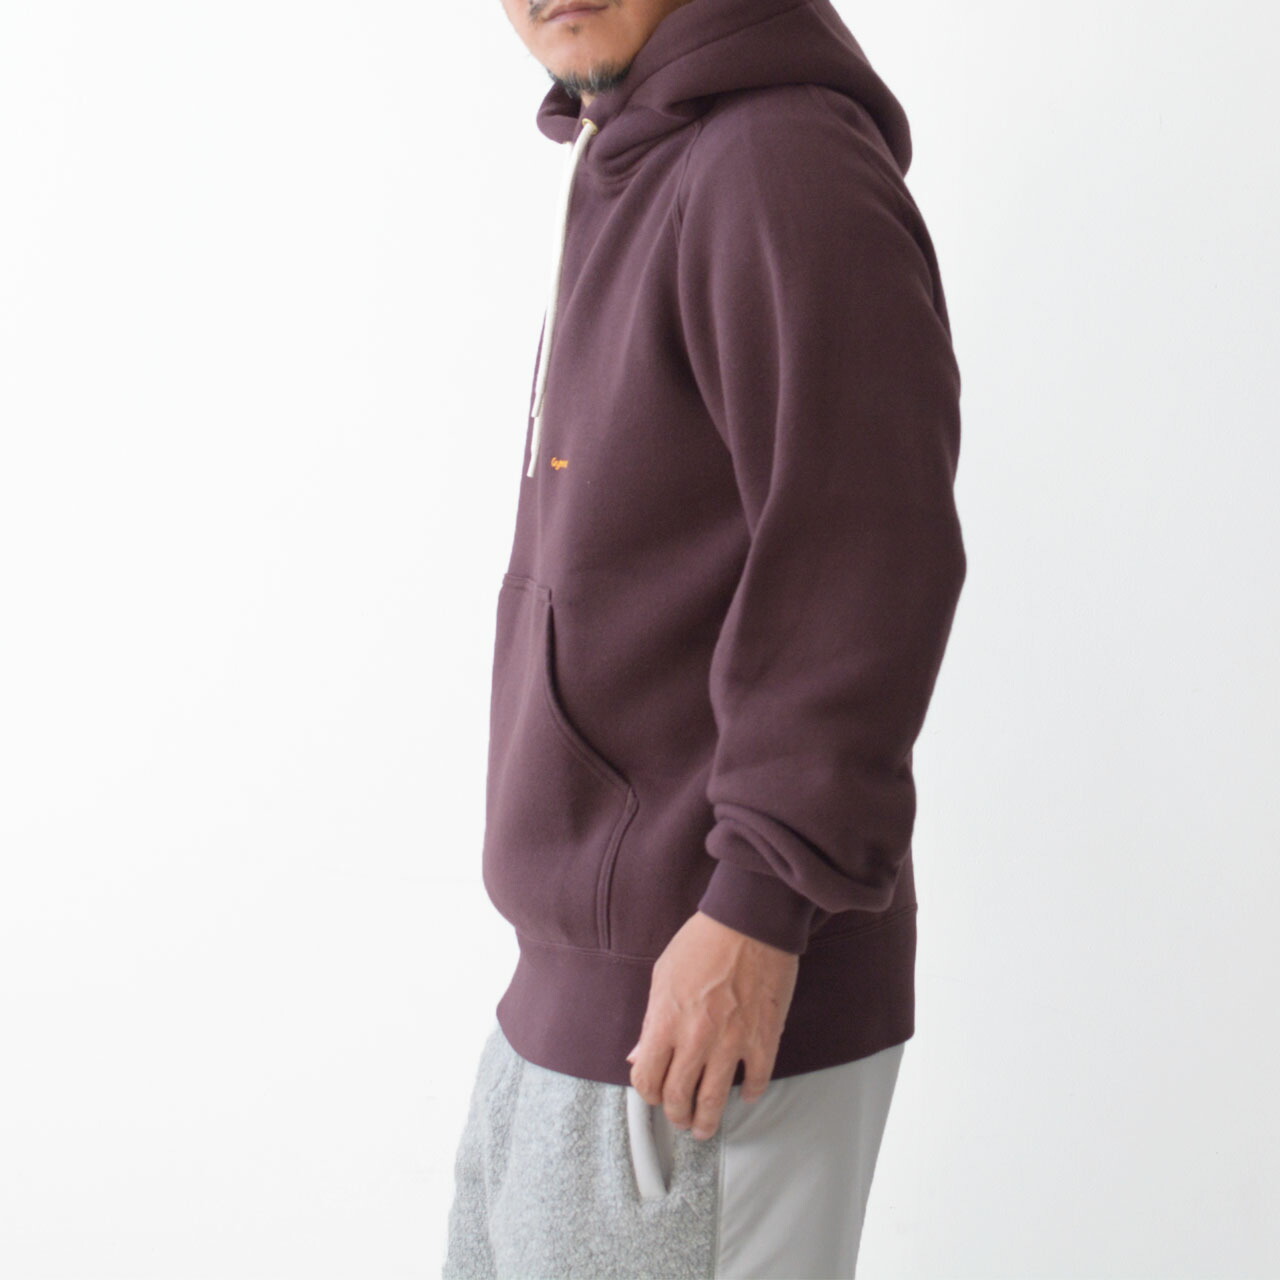 Gymphlex [ジムフレックス] SWING SLEEVE PULLOVER HOODIE [GY-C0014 ARB]_f0051306_13541374.jpg